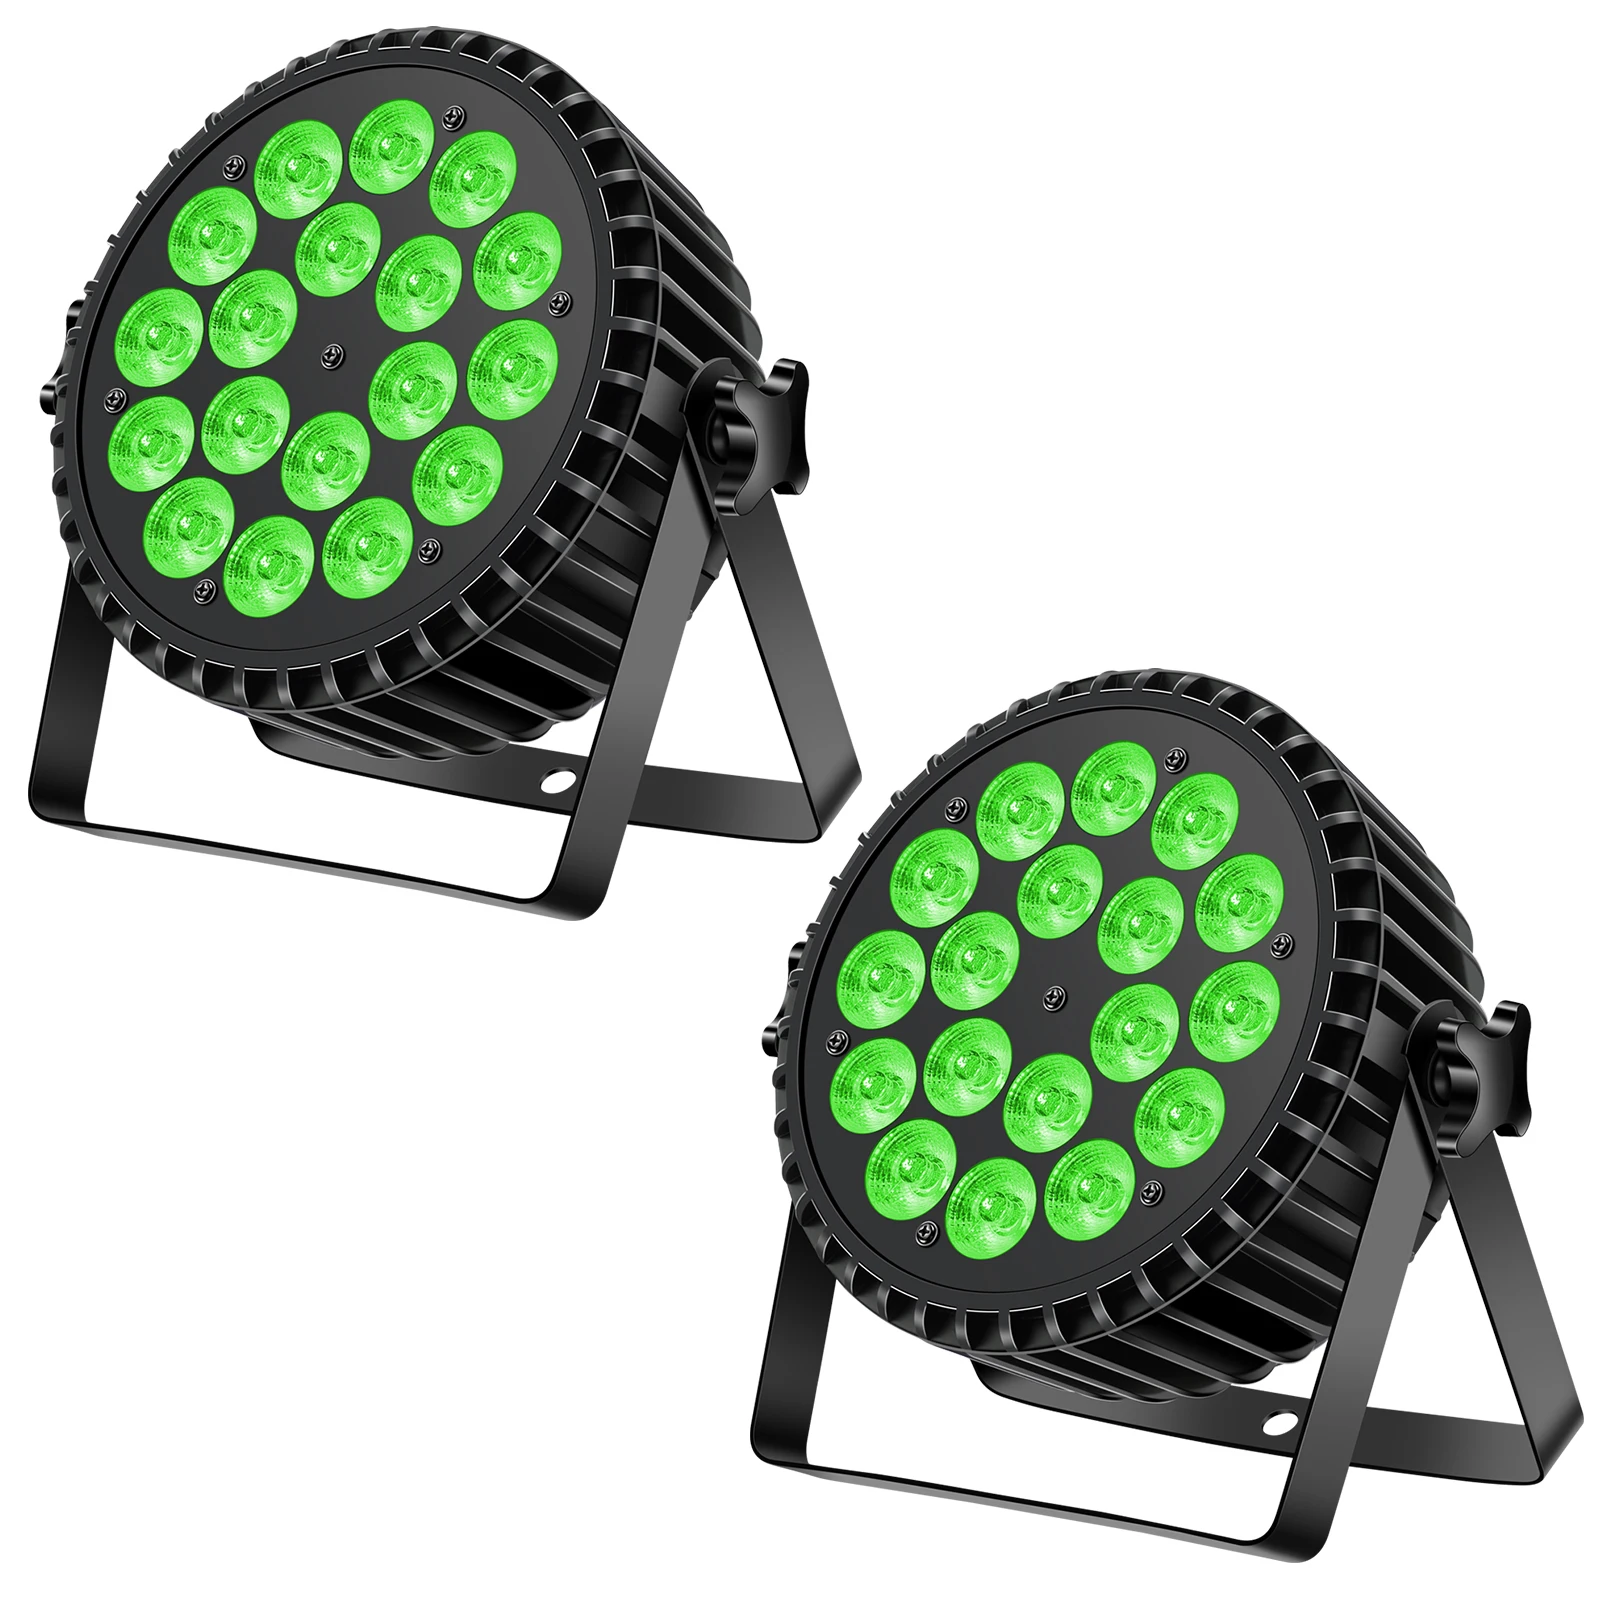 200W 2PCS 18 * 10W 4 IN 1 RGBW LED HOLDLAMP Par DMX Stage Effect Light Infinite Mixing and Rainbow Effect